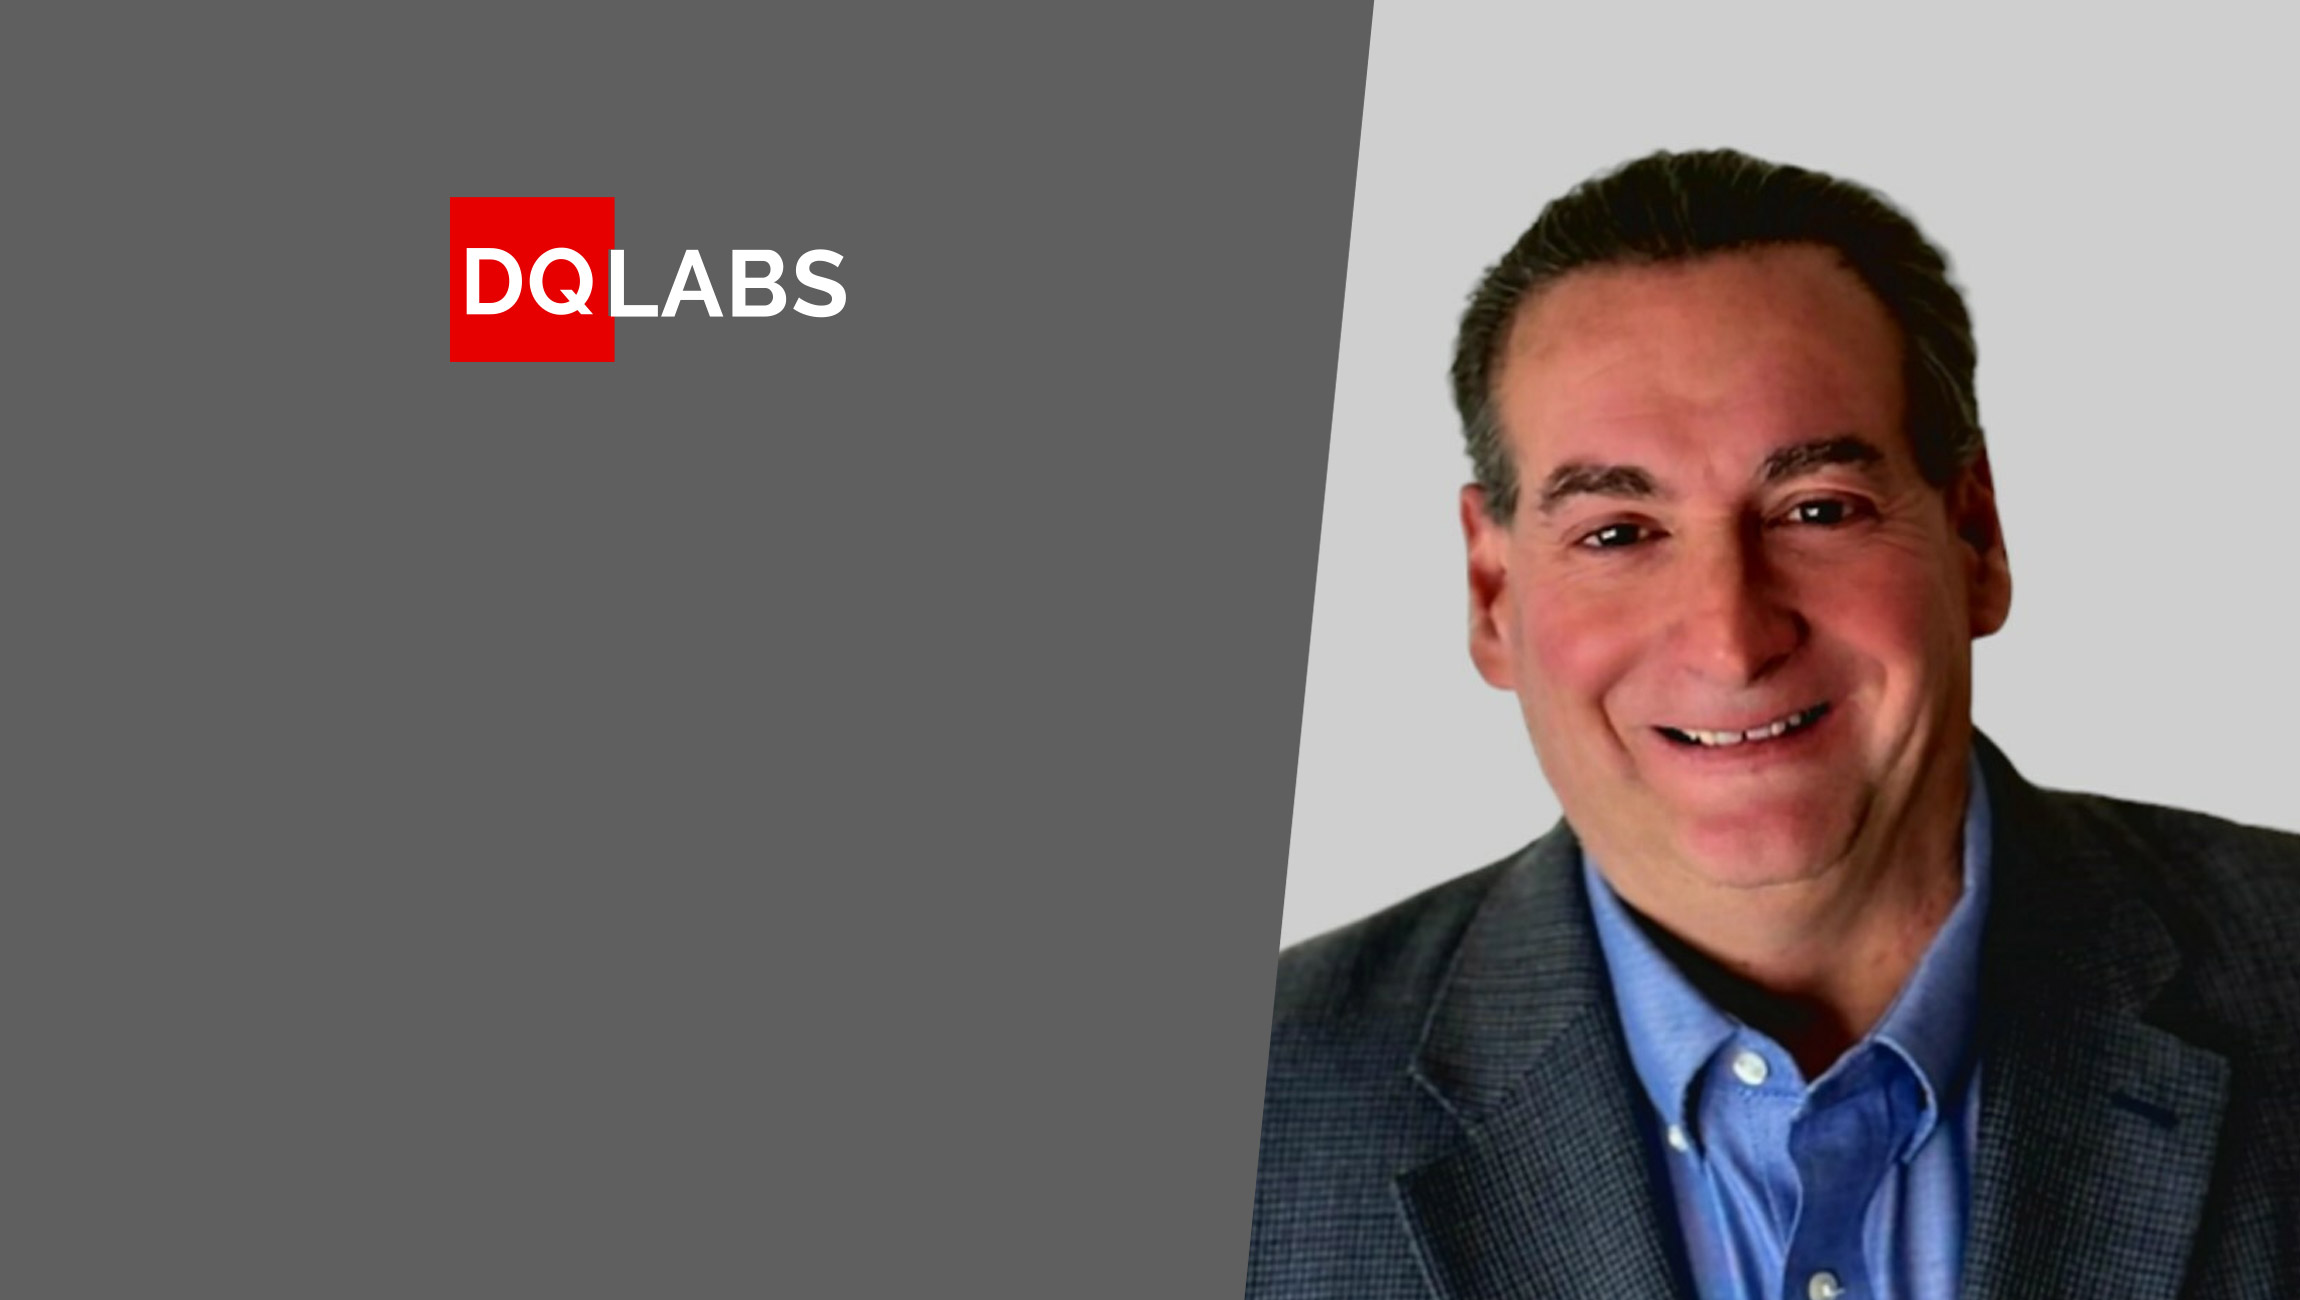 DQLabs Appoints Dave Casillo as Chief Revenue Officer to Drive Strategic Growth